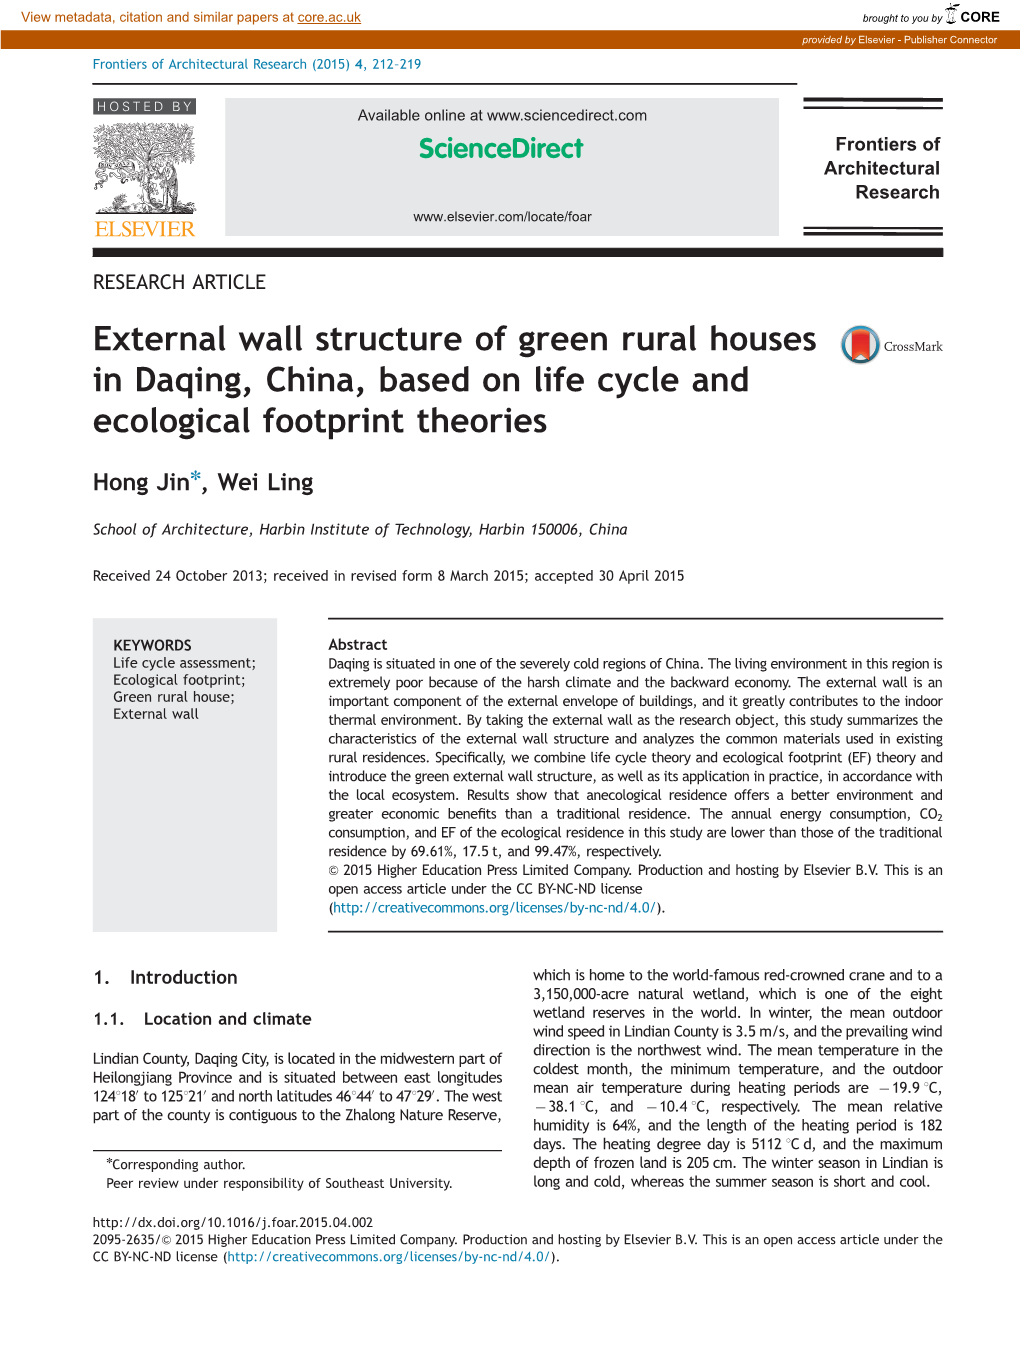 External Wall Structure of Green Rural Houses in Daqing, China, Based on Life Cycle and Ecological Footprint Theories